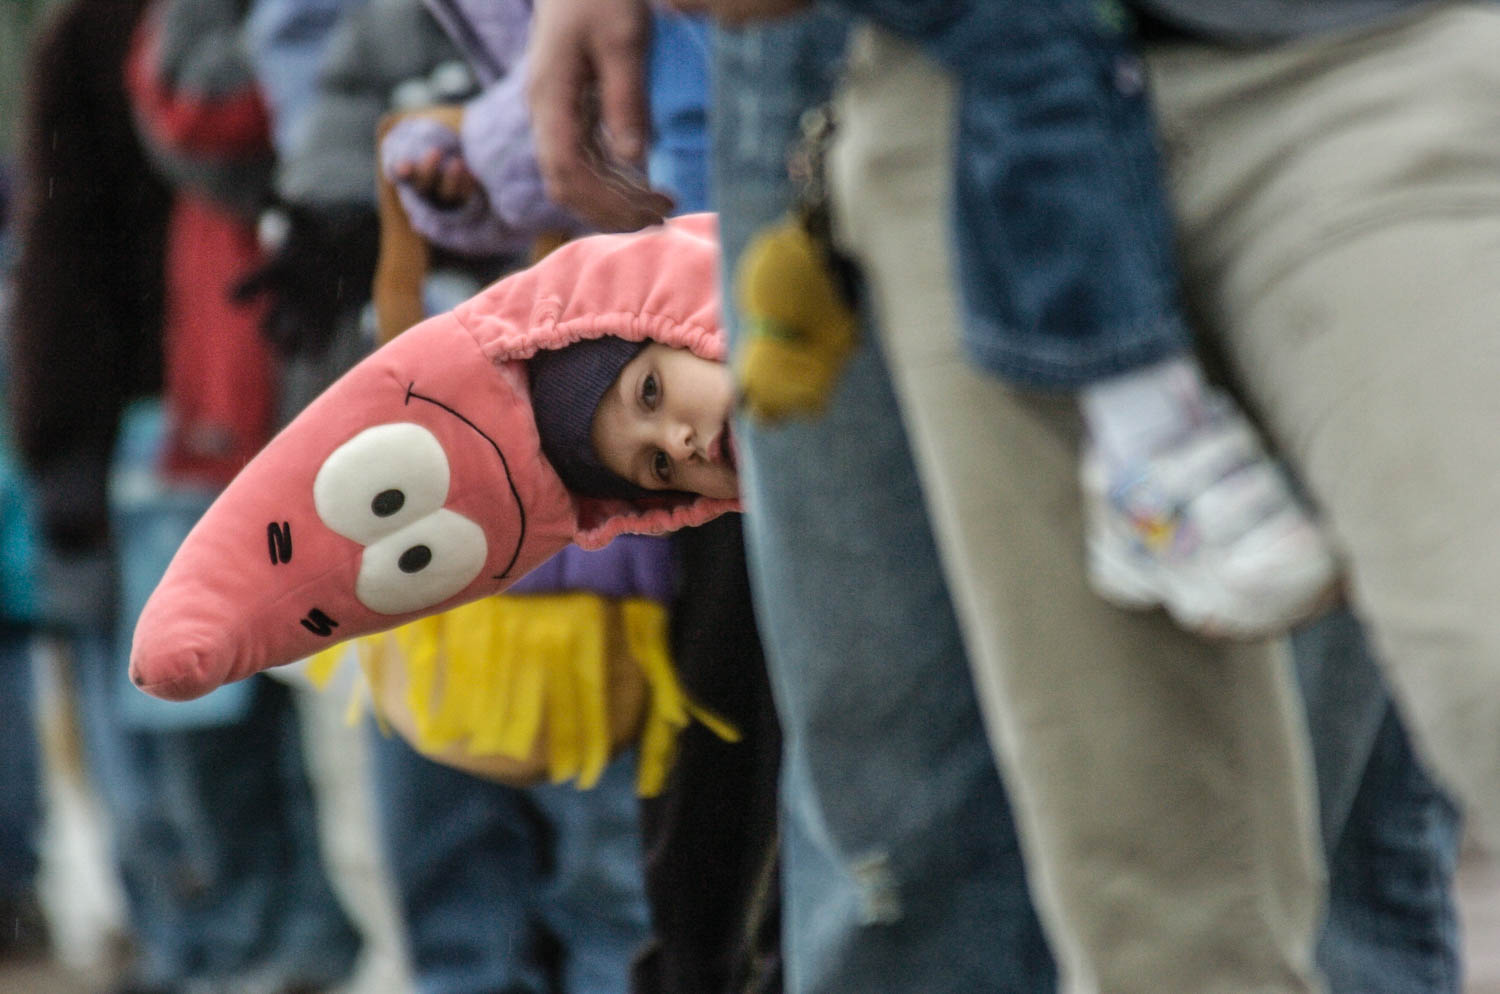 Sebastien Cortez, 5 of Moline, sports a Patrick the Starfish costume, a character from the cartoon SpongeBob SquarePants, as he peeks around the crowd gathered along Avenue of the Cities Sunday afternoon for the Moline Council of Associated Dad's Clubs 48th annual Halloween parade. (Todd Mizener - Dispatch/Argus) 